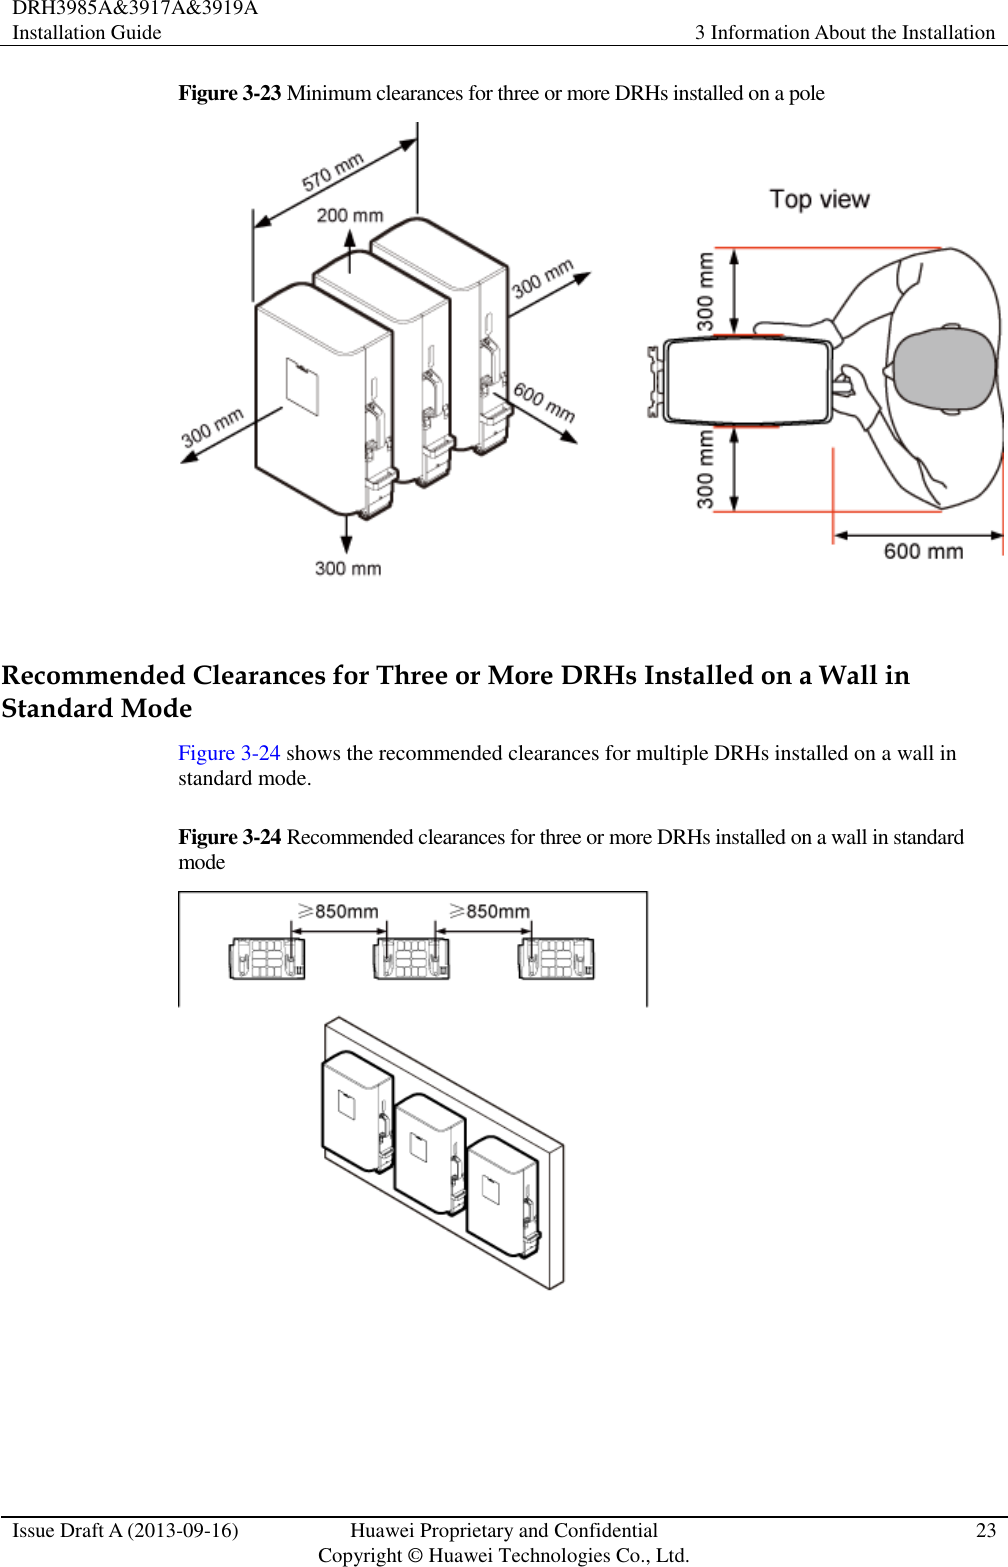 DRH3985A&amp;3917A&amp;3919A Installation Guide 3 Information About the Installation  Issue Draft A (2013-09-16) Huawei Proprietary and Confidential                                     Copyright © Huawei Technologies Co., Ltd. 23  Figure 3-23 Minimum clearances for three or more DRHs installed on a pole   Recommended Clearances for Three or More DRHs Installed on a Wall in Standard Mode Figure 3-24 shows the recommended clearances for multiple DRHs installed on a wall in standard mode. Figure 3-24 Recommended clearances for three or more DRHs installed on a wall in standard mode   